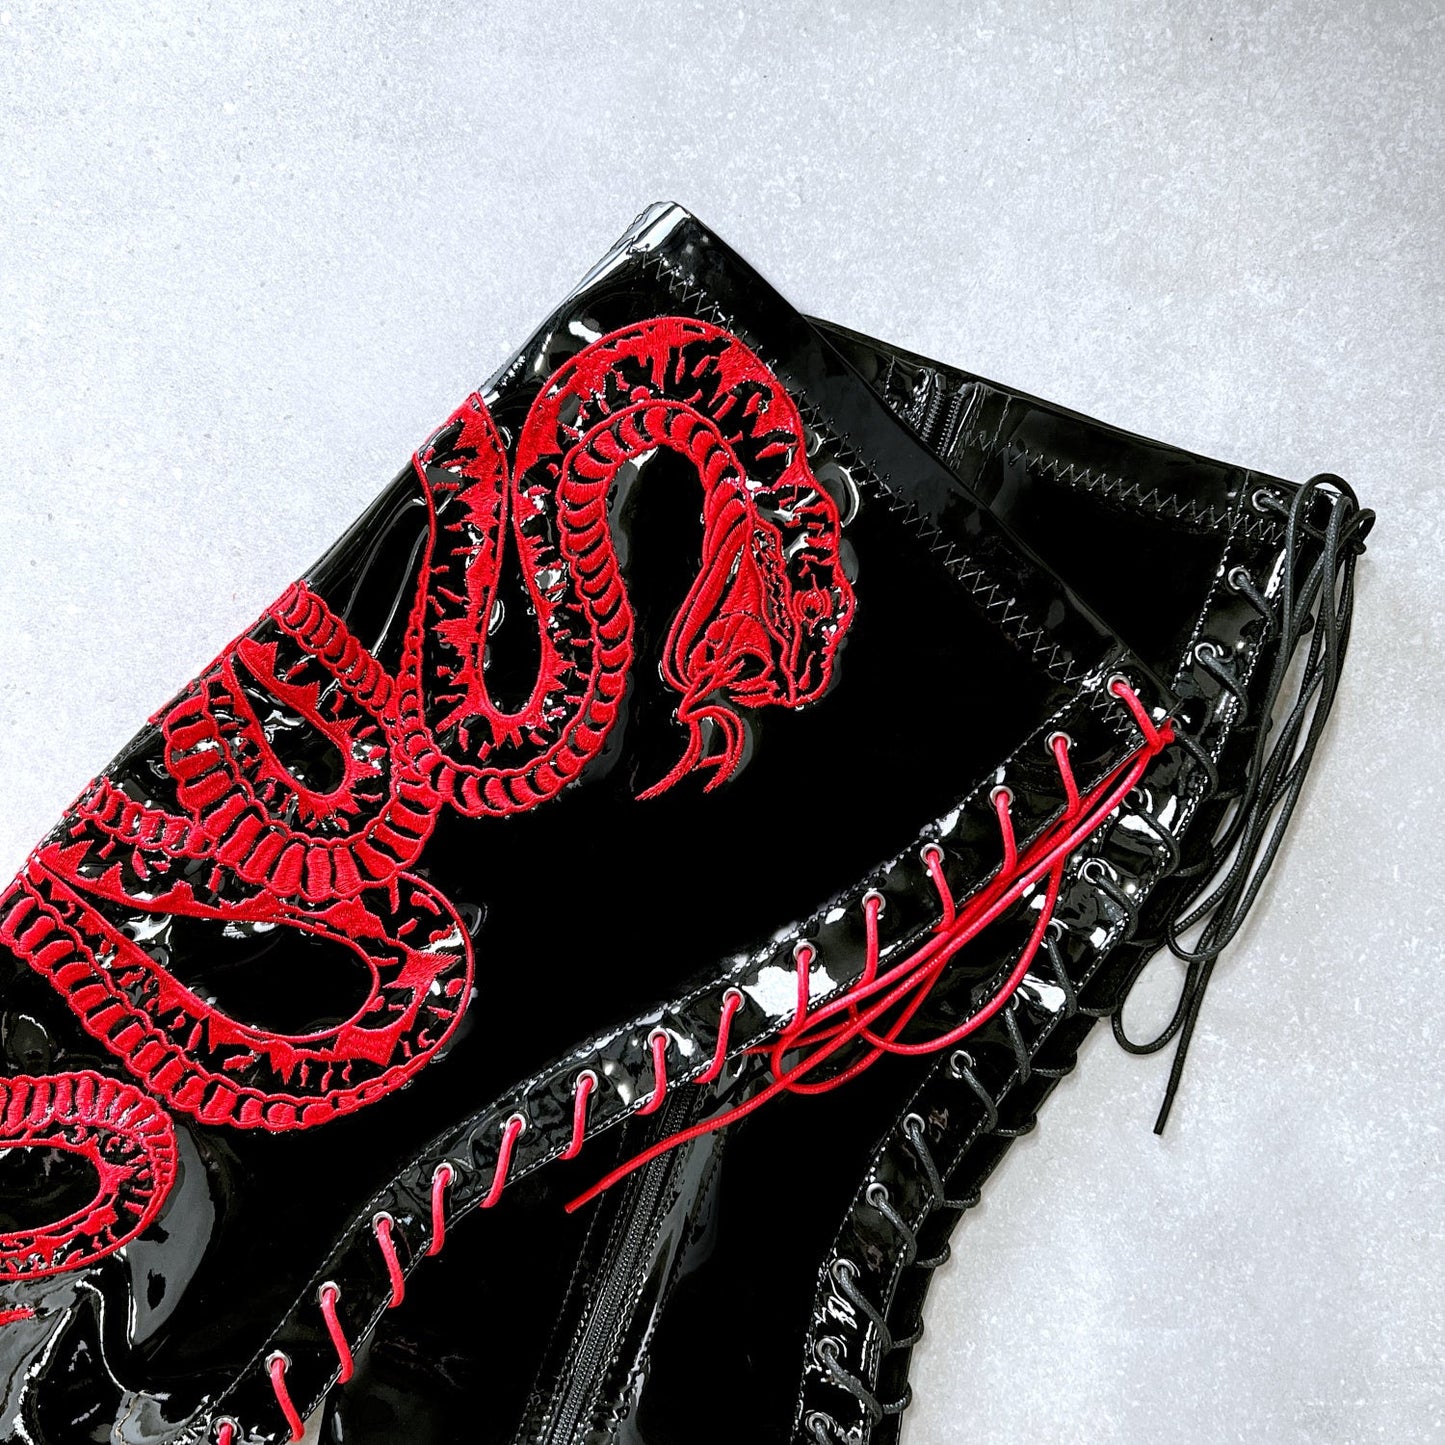 VIPER Boot Black with Red Thicc Thigh High - 8INCH